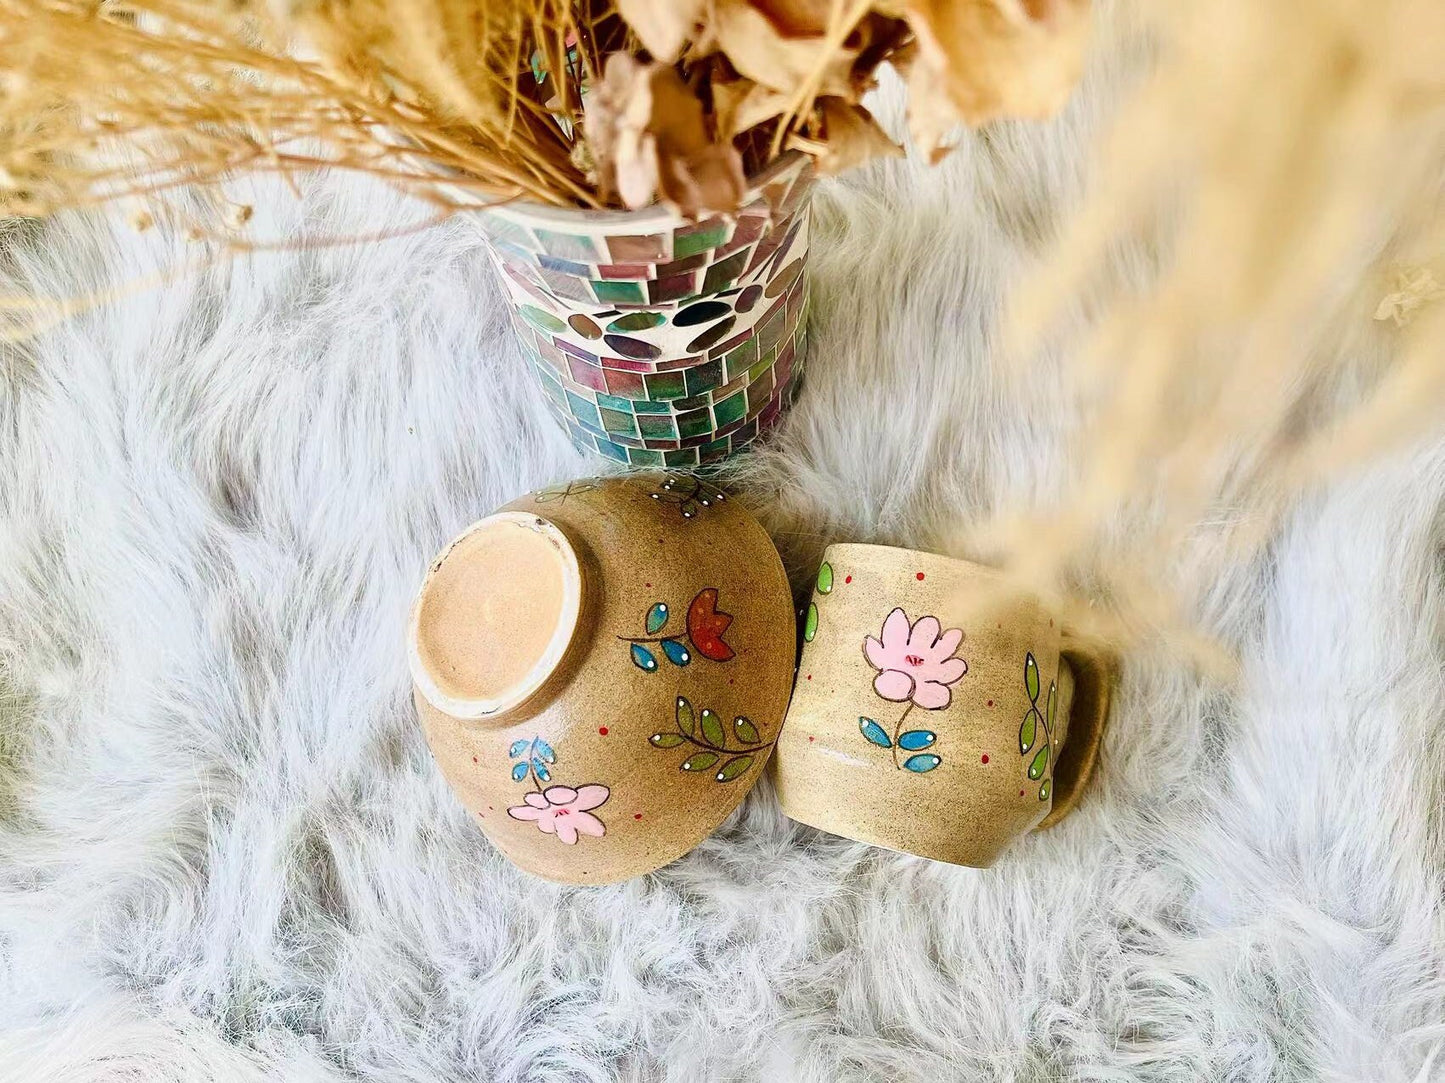 Hand-Painted Coarse Pottery Ceramic Mugs And Bowls With Charming Floral Designs